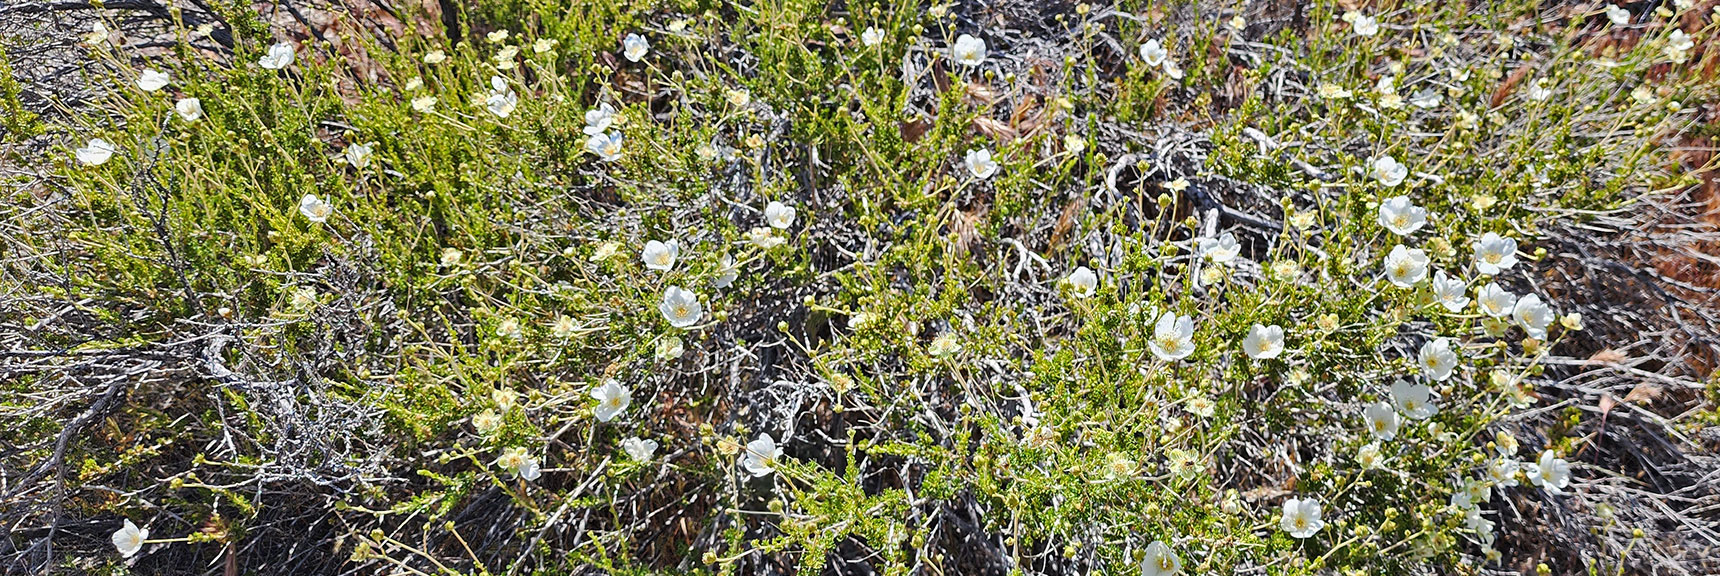 Collecting Now, Will Identify Later | Flowers Above 5000ft | LasVegasAreaTrails.com | Southwestern US | Lovell Canyon, Nevada